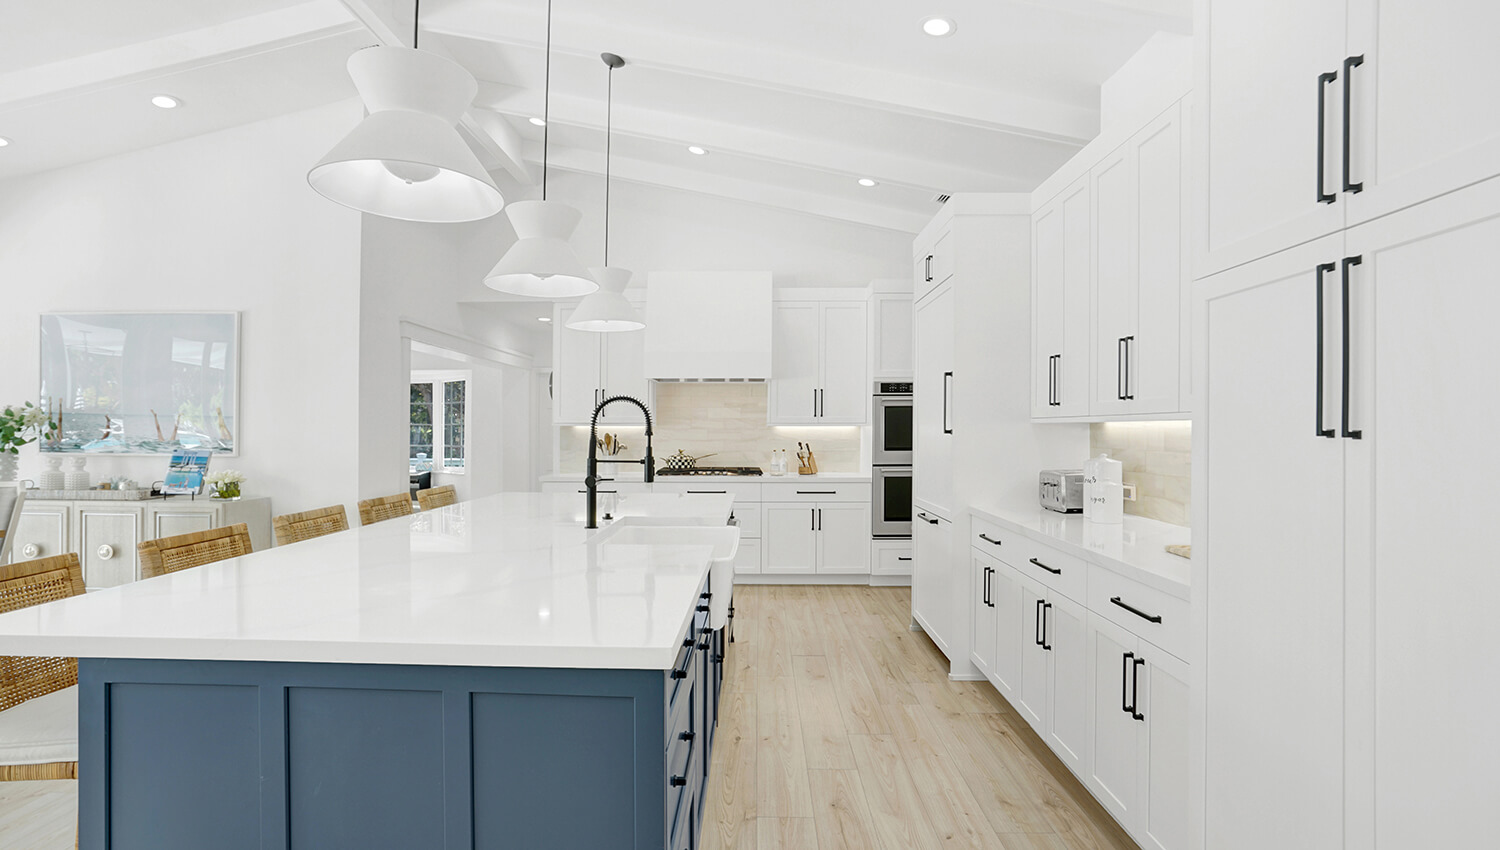 A bright white Modern Farmhouse style kitchen with a navy blue kitchen island and shaker style cabinet doors.